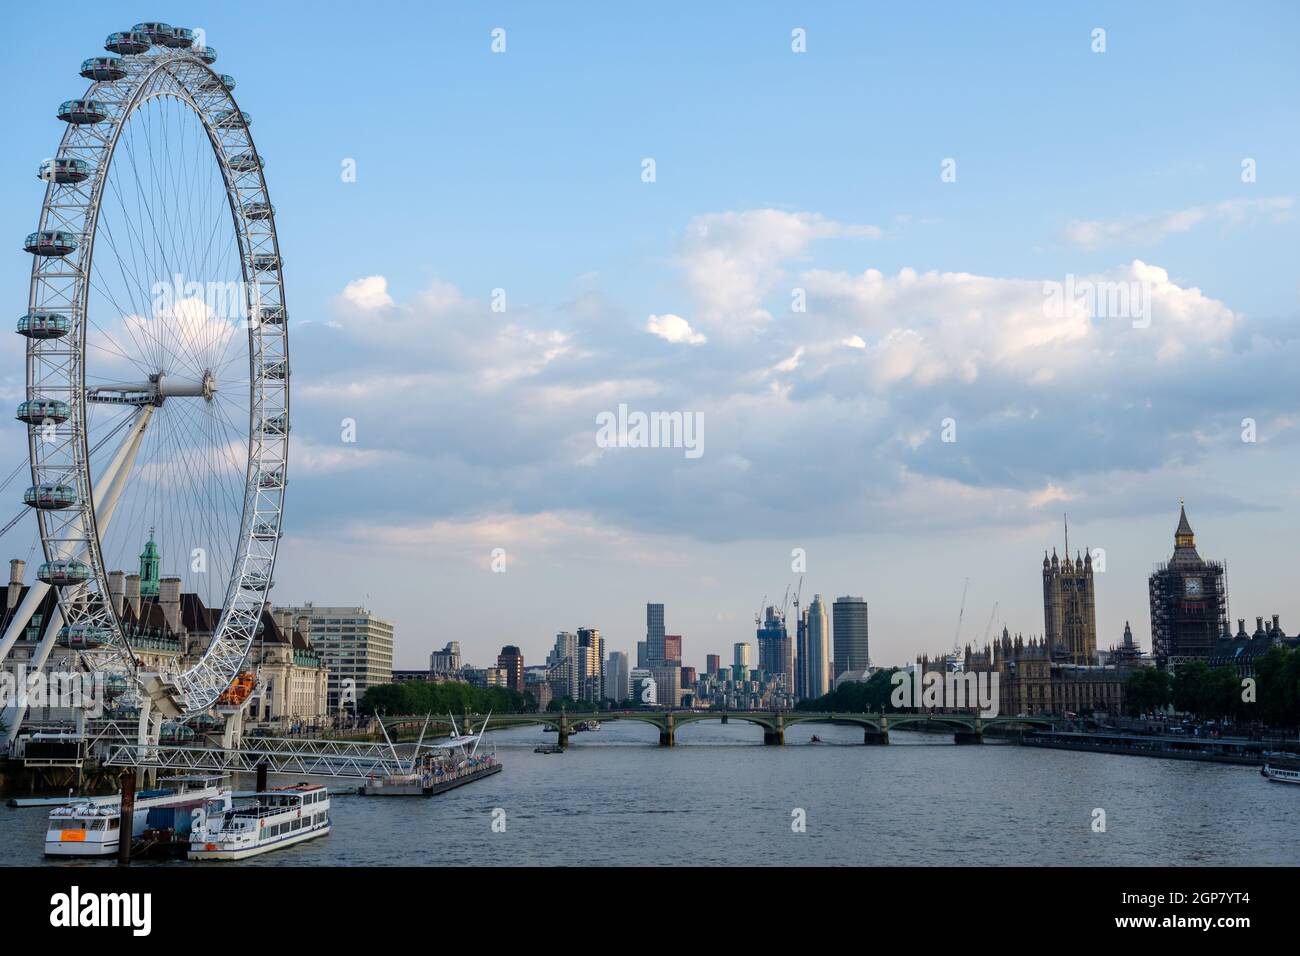 The London Eye and Houses of Parliament on the River Thames Stock Photo